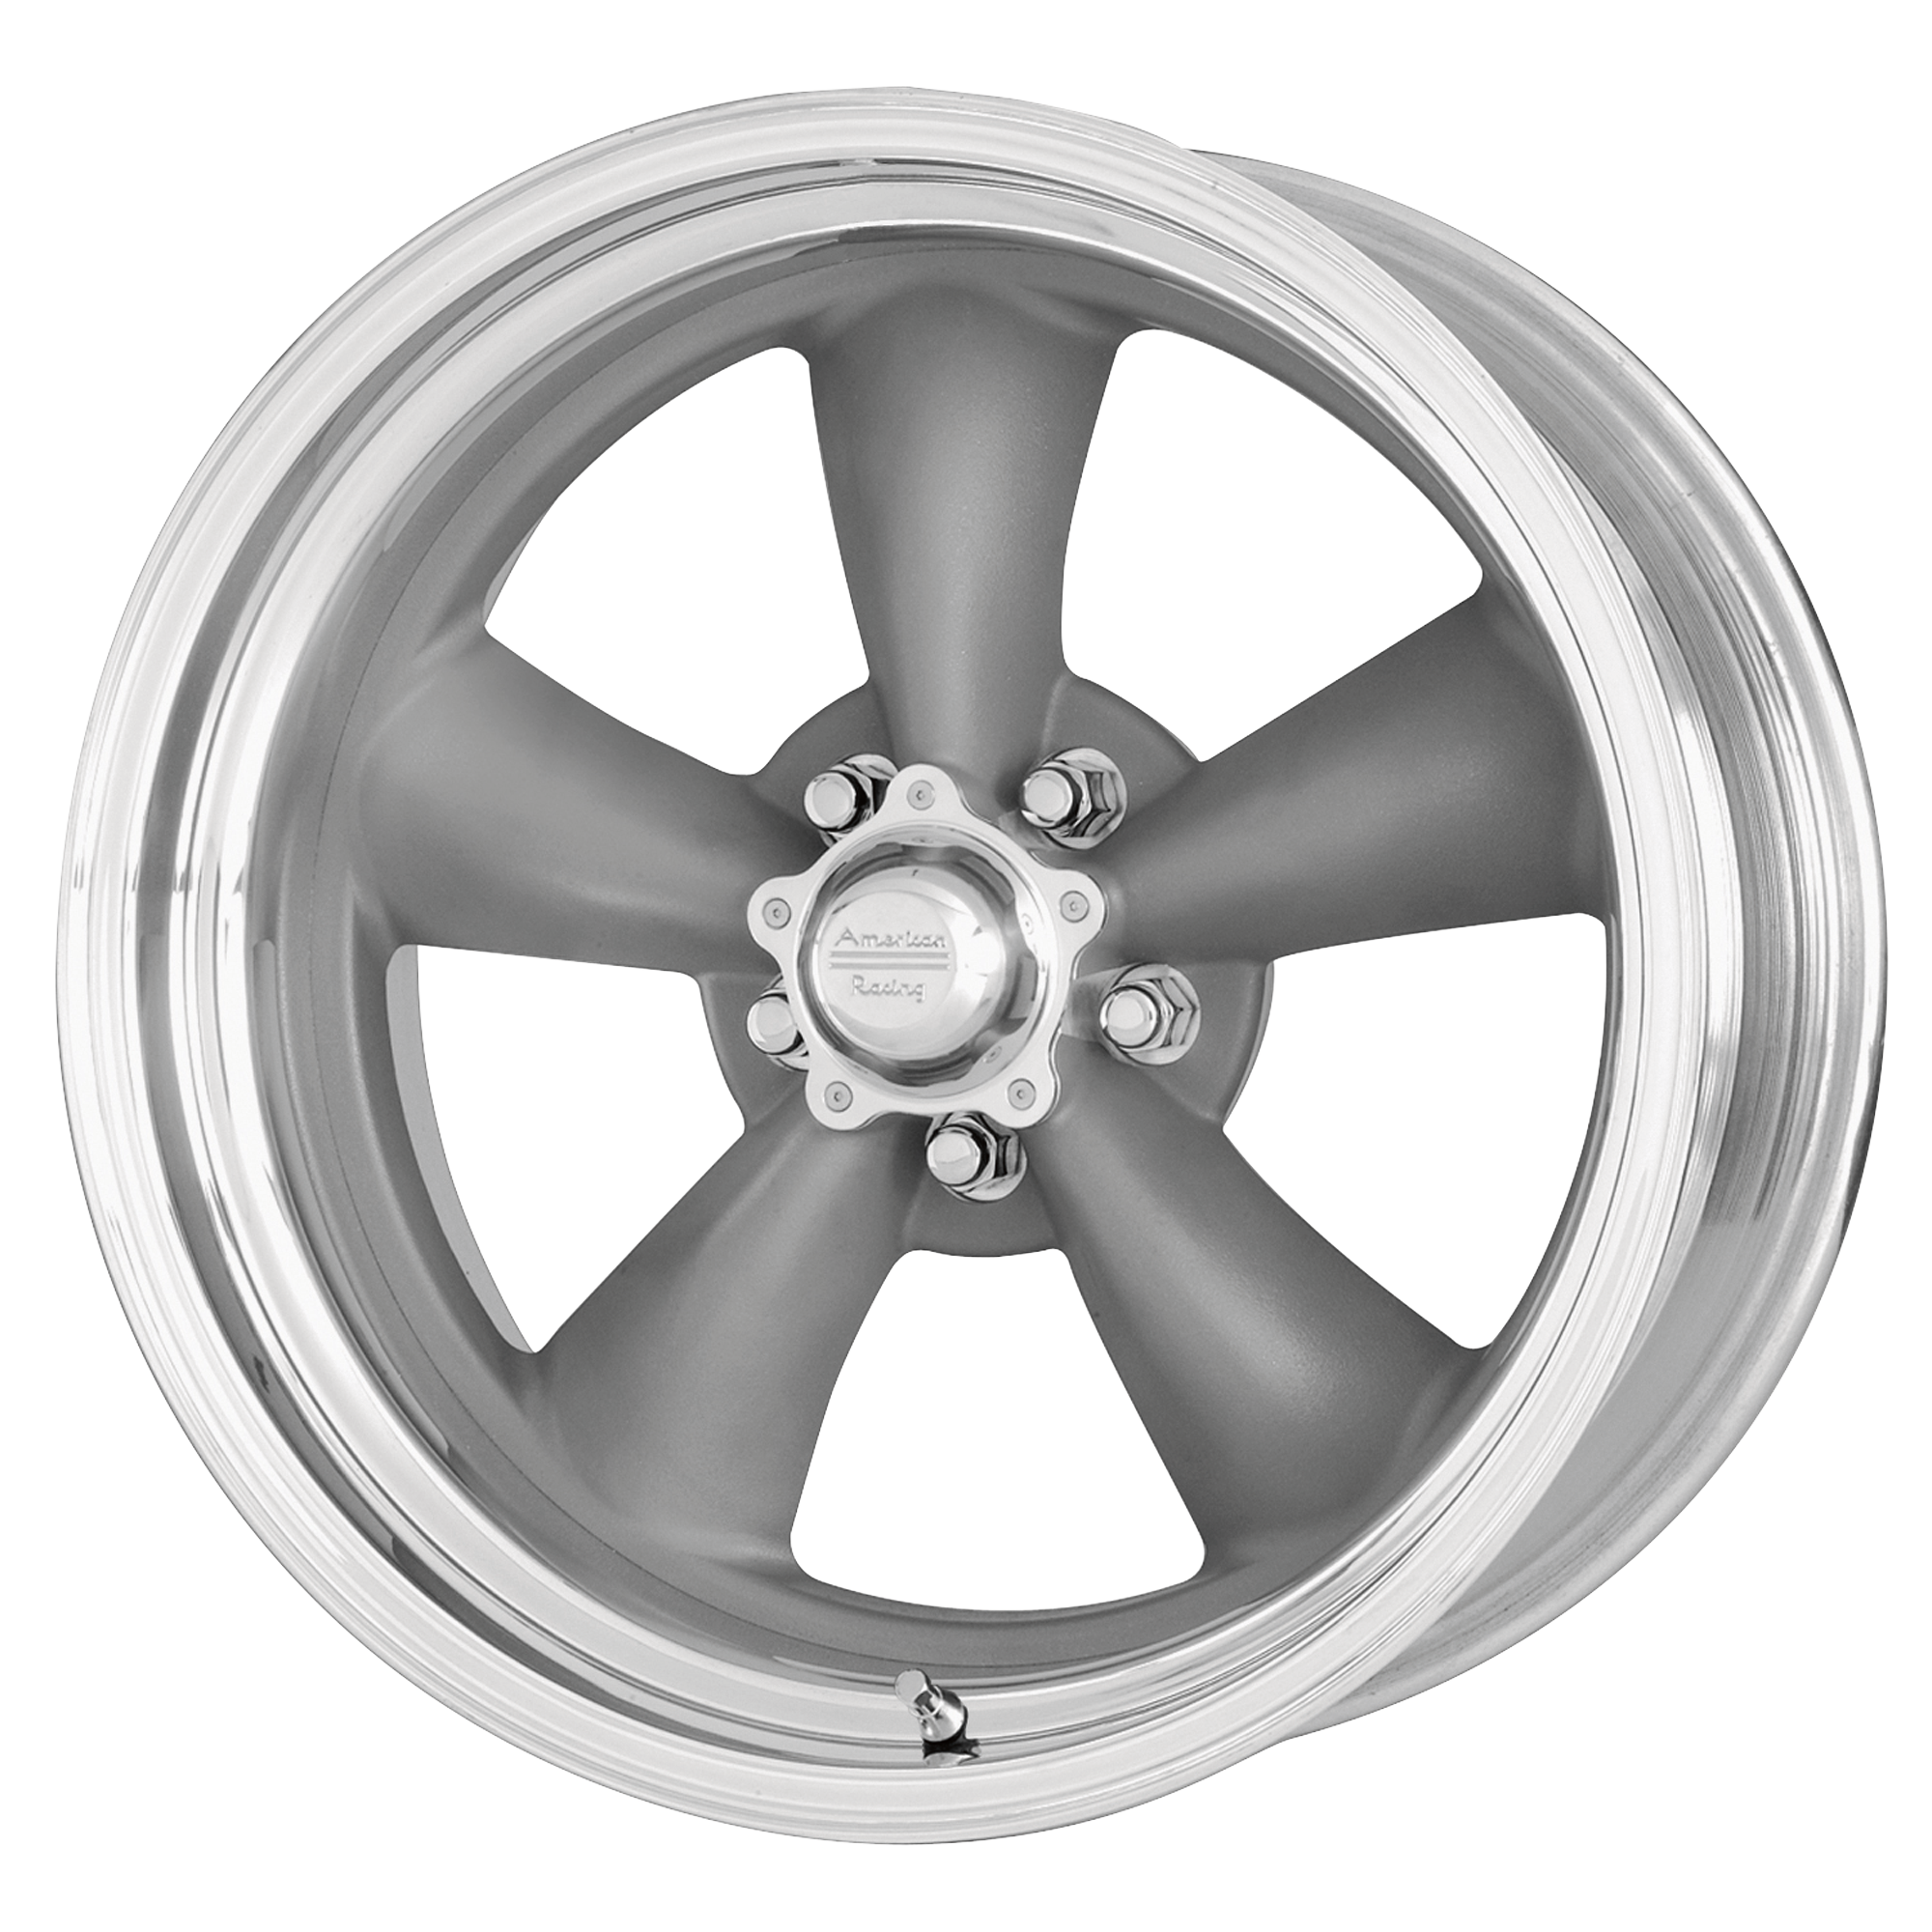 CLASSIC TORQ THRUST II ONE PIECE 17x9.5 5x127.00 MAG GRAY W/ MACHINED LIP (8 mm) - Tires and Engine Performance